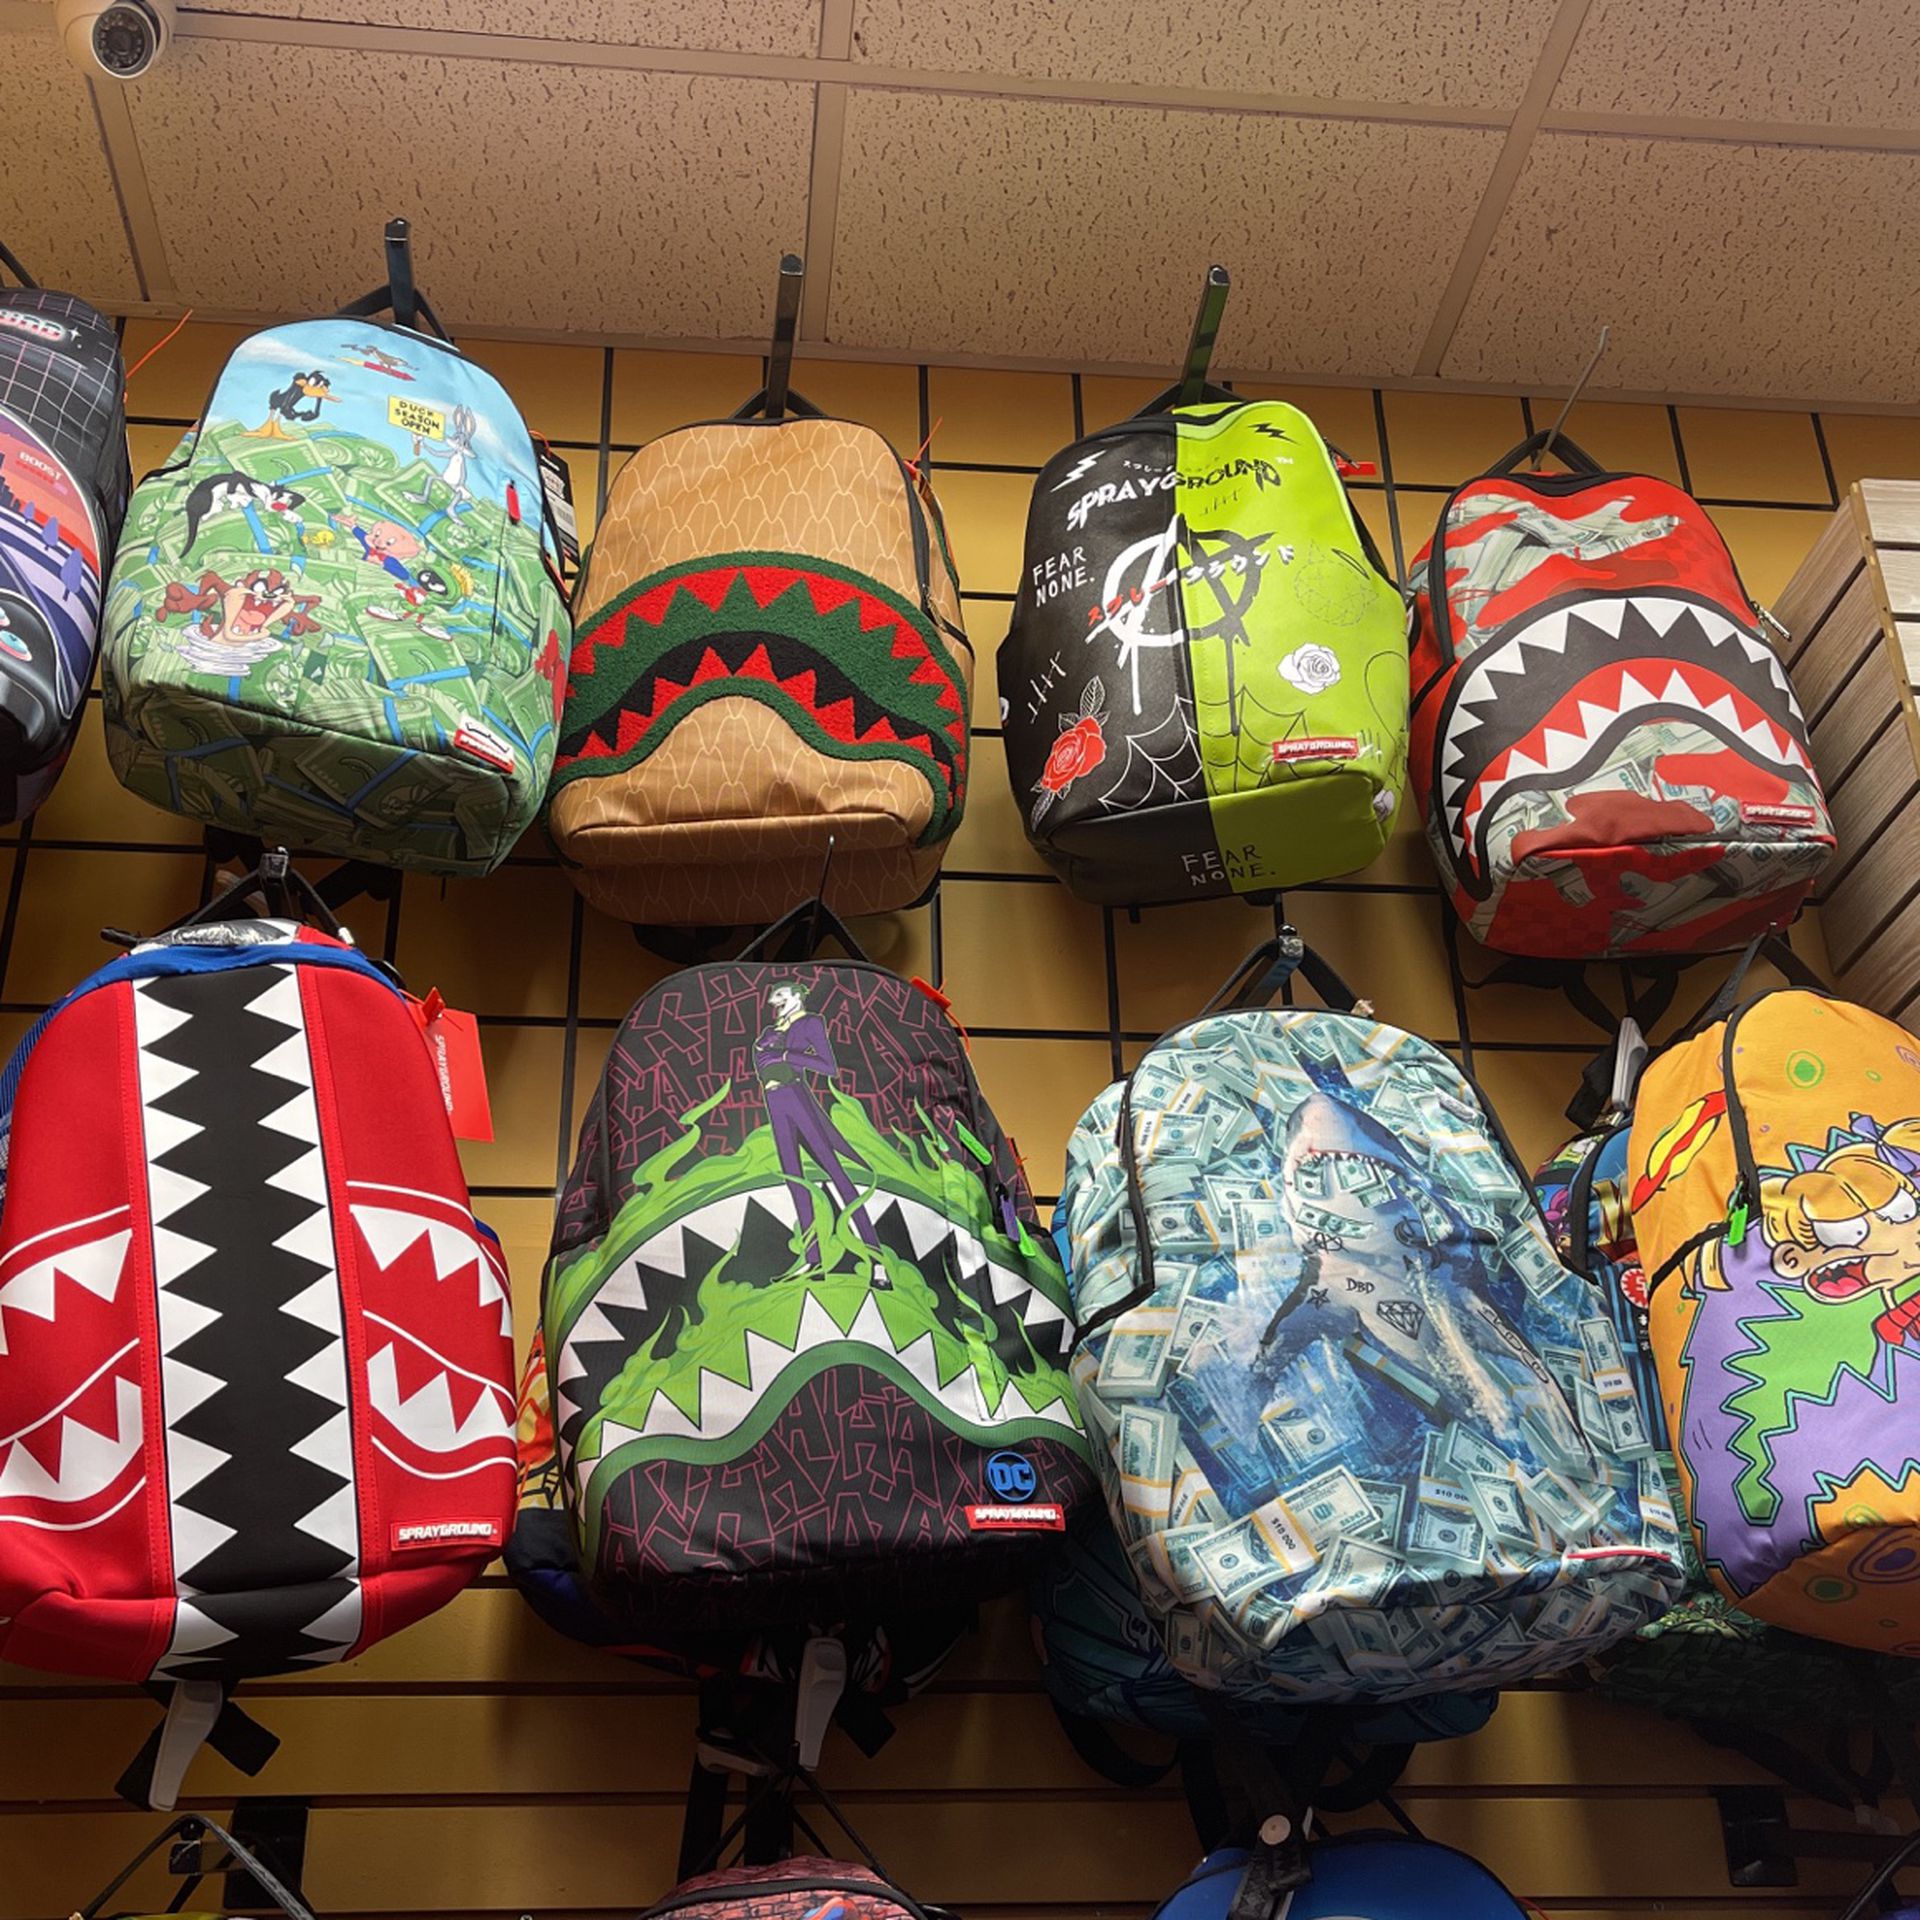 Sprayground Backpack Brand New!! Sold Out Everywhere for Sale in Bremerton,  WA - OfferUp